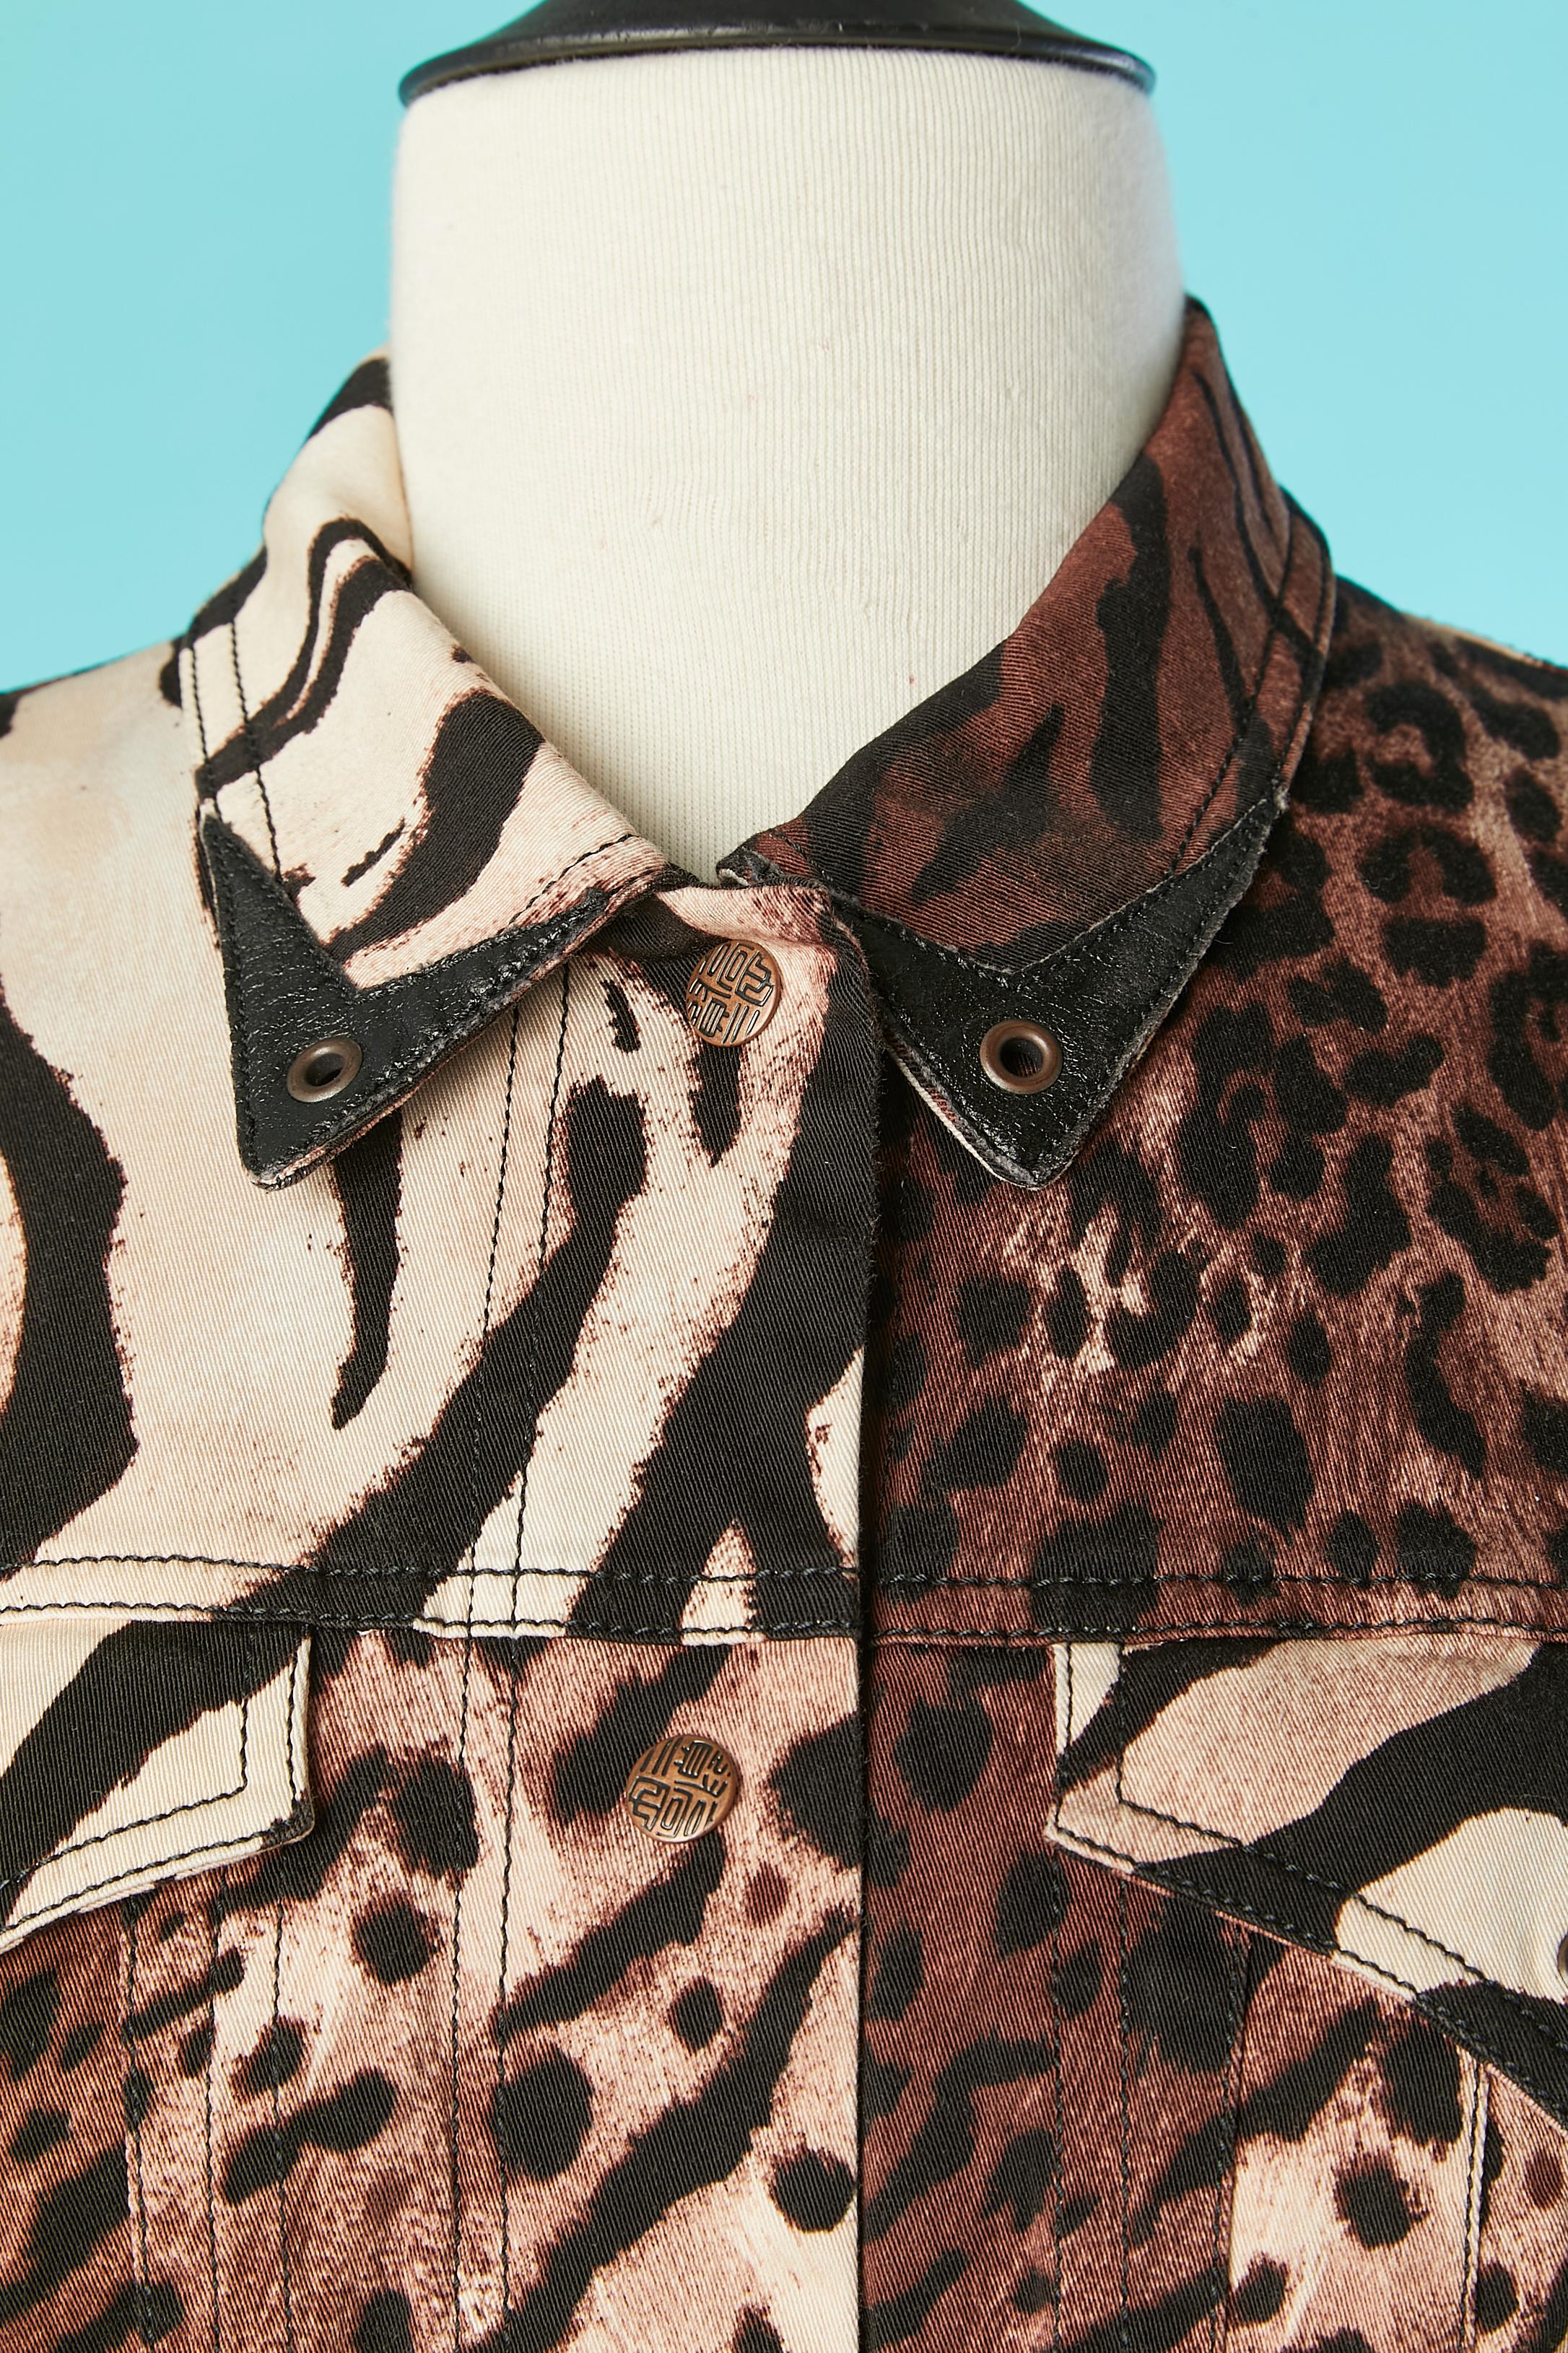 Animal printed shirt with leather details. 
Branded snaps closure in the middle front. Eyelet on collar and pockets. Top-stitched. 
Fabric composition: 98% cotton, 2% elastane. 
size 44 / L 